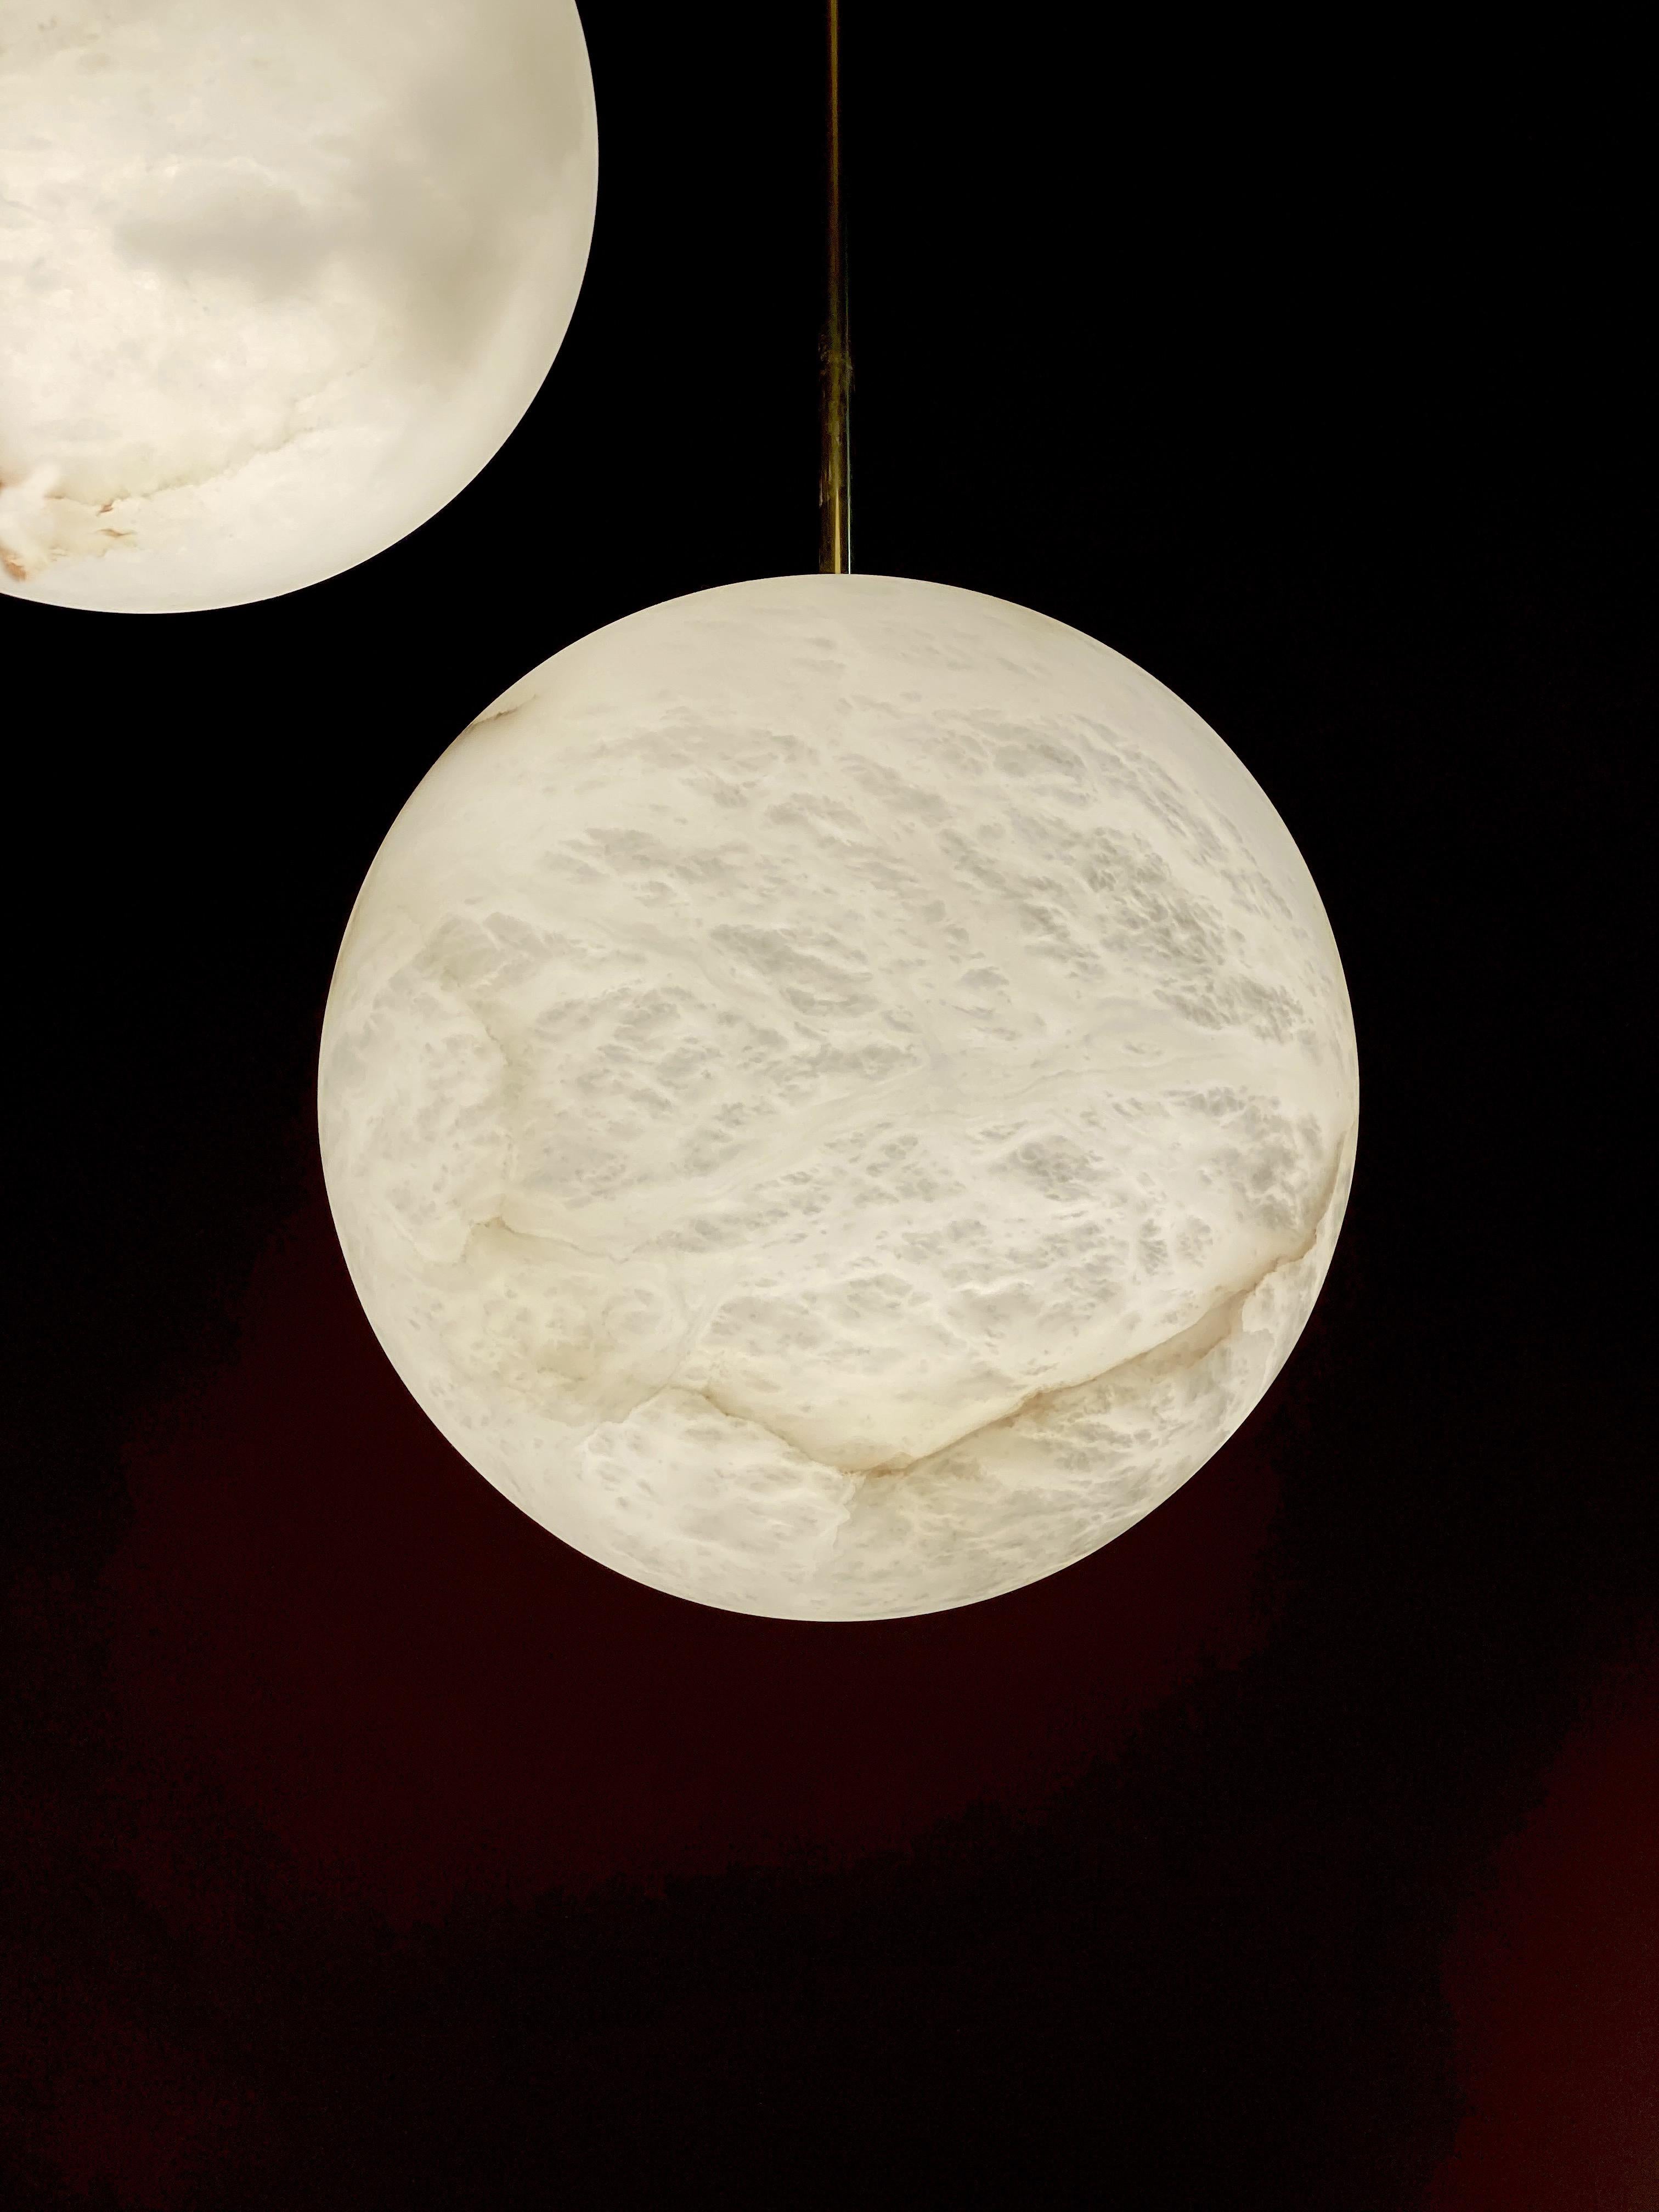 Galaxy contemporary Italian alabaster marble globe chandelier.
Exclusive production of Tuscany alabaster, handmade with great skill of Italian craftsmanship. 
This light fixture can be disassembled and the marble globes individually wrapped for easy